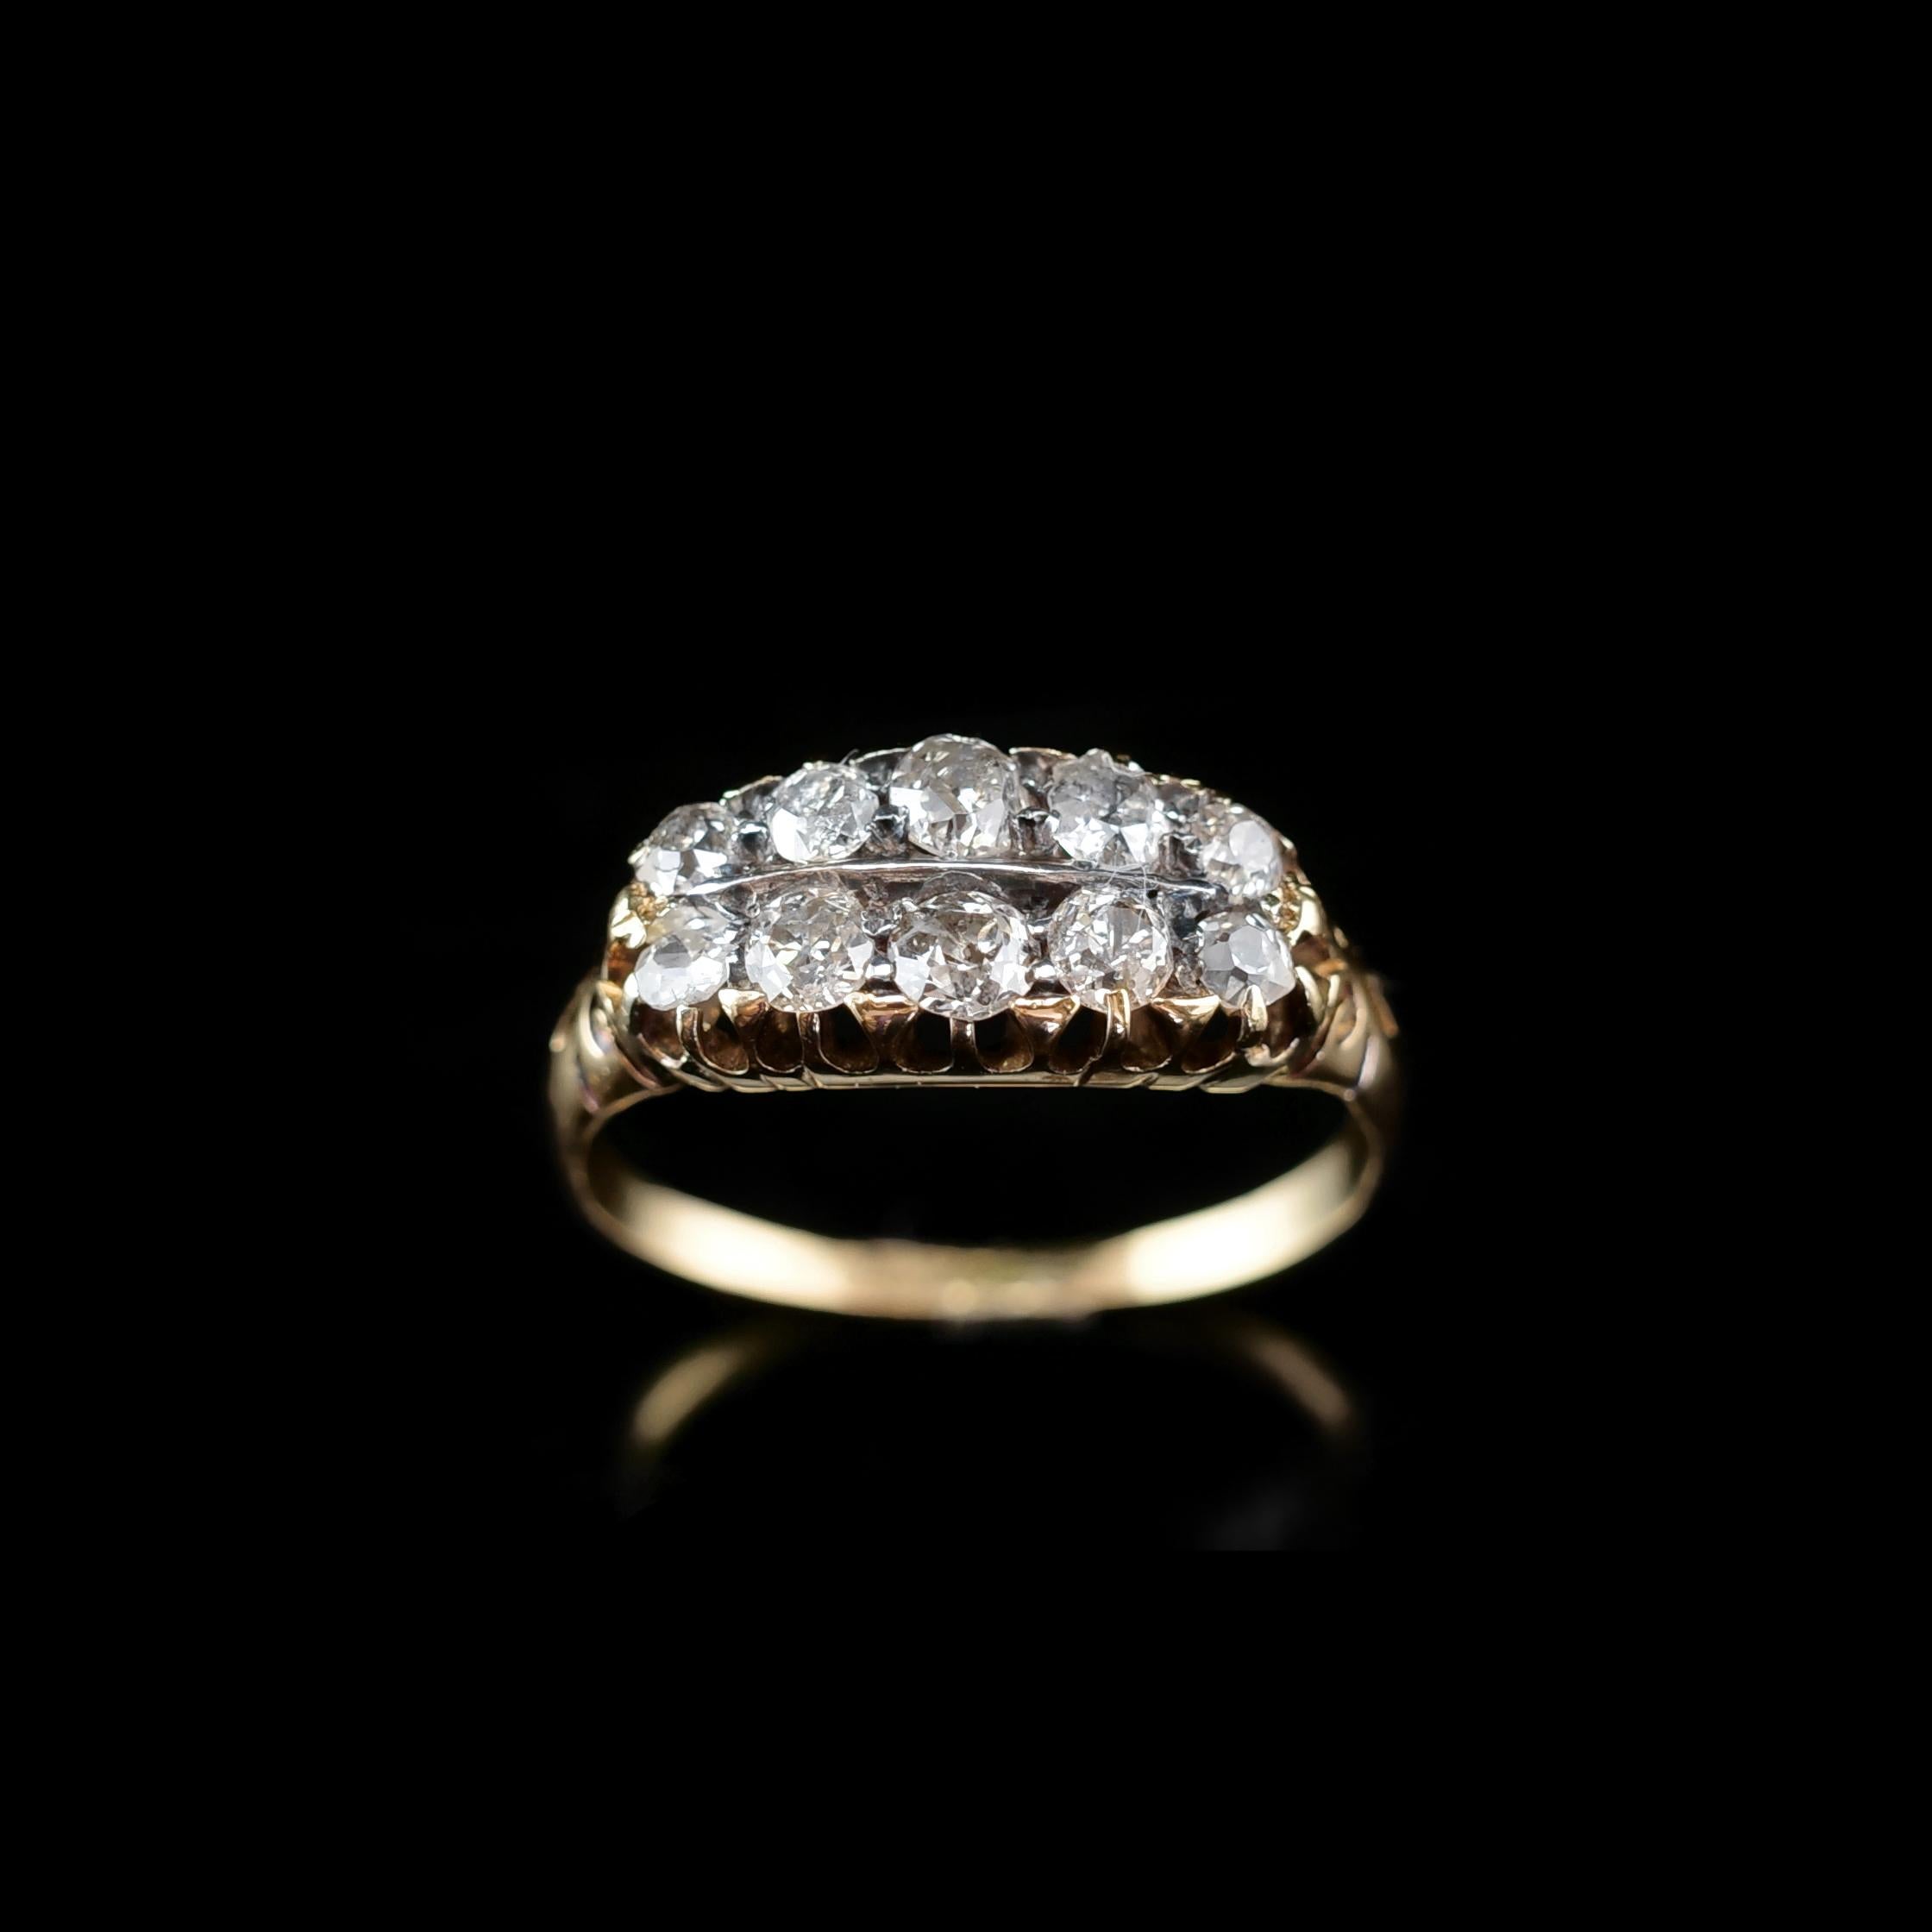 Antique Victorian 18K Gold Diamond Ring Old Cut Two Row Boat-Shaped, c.1890 For Sale 1